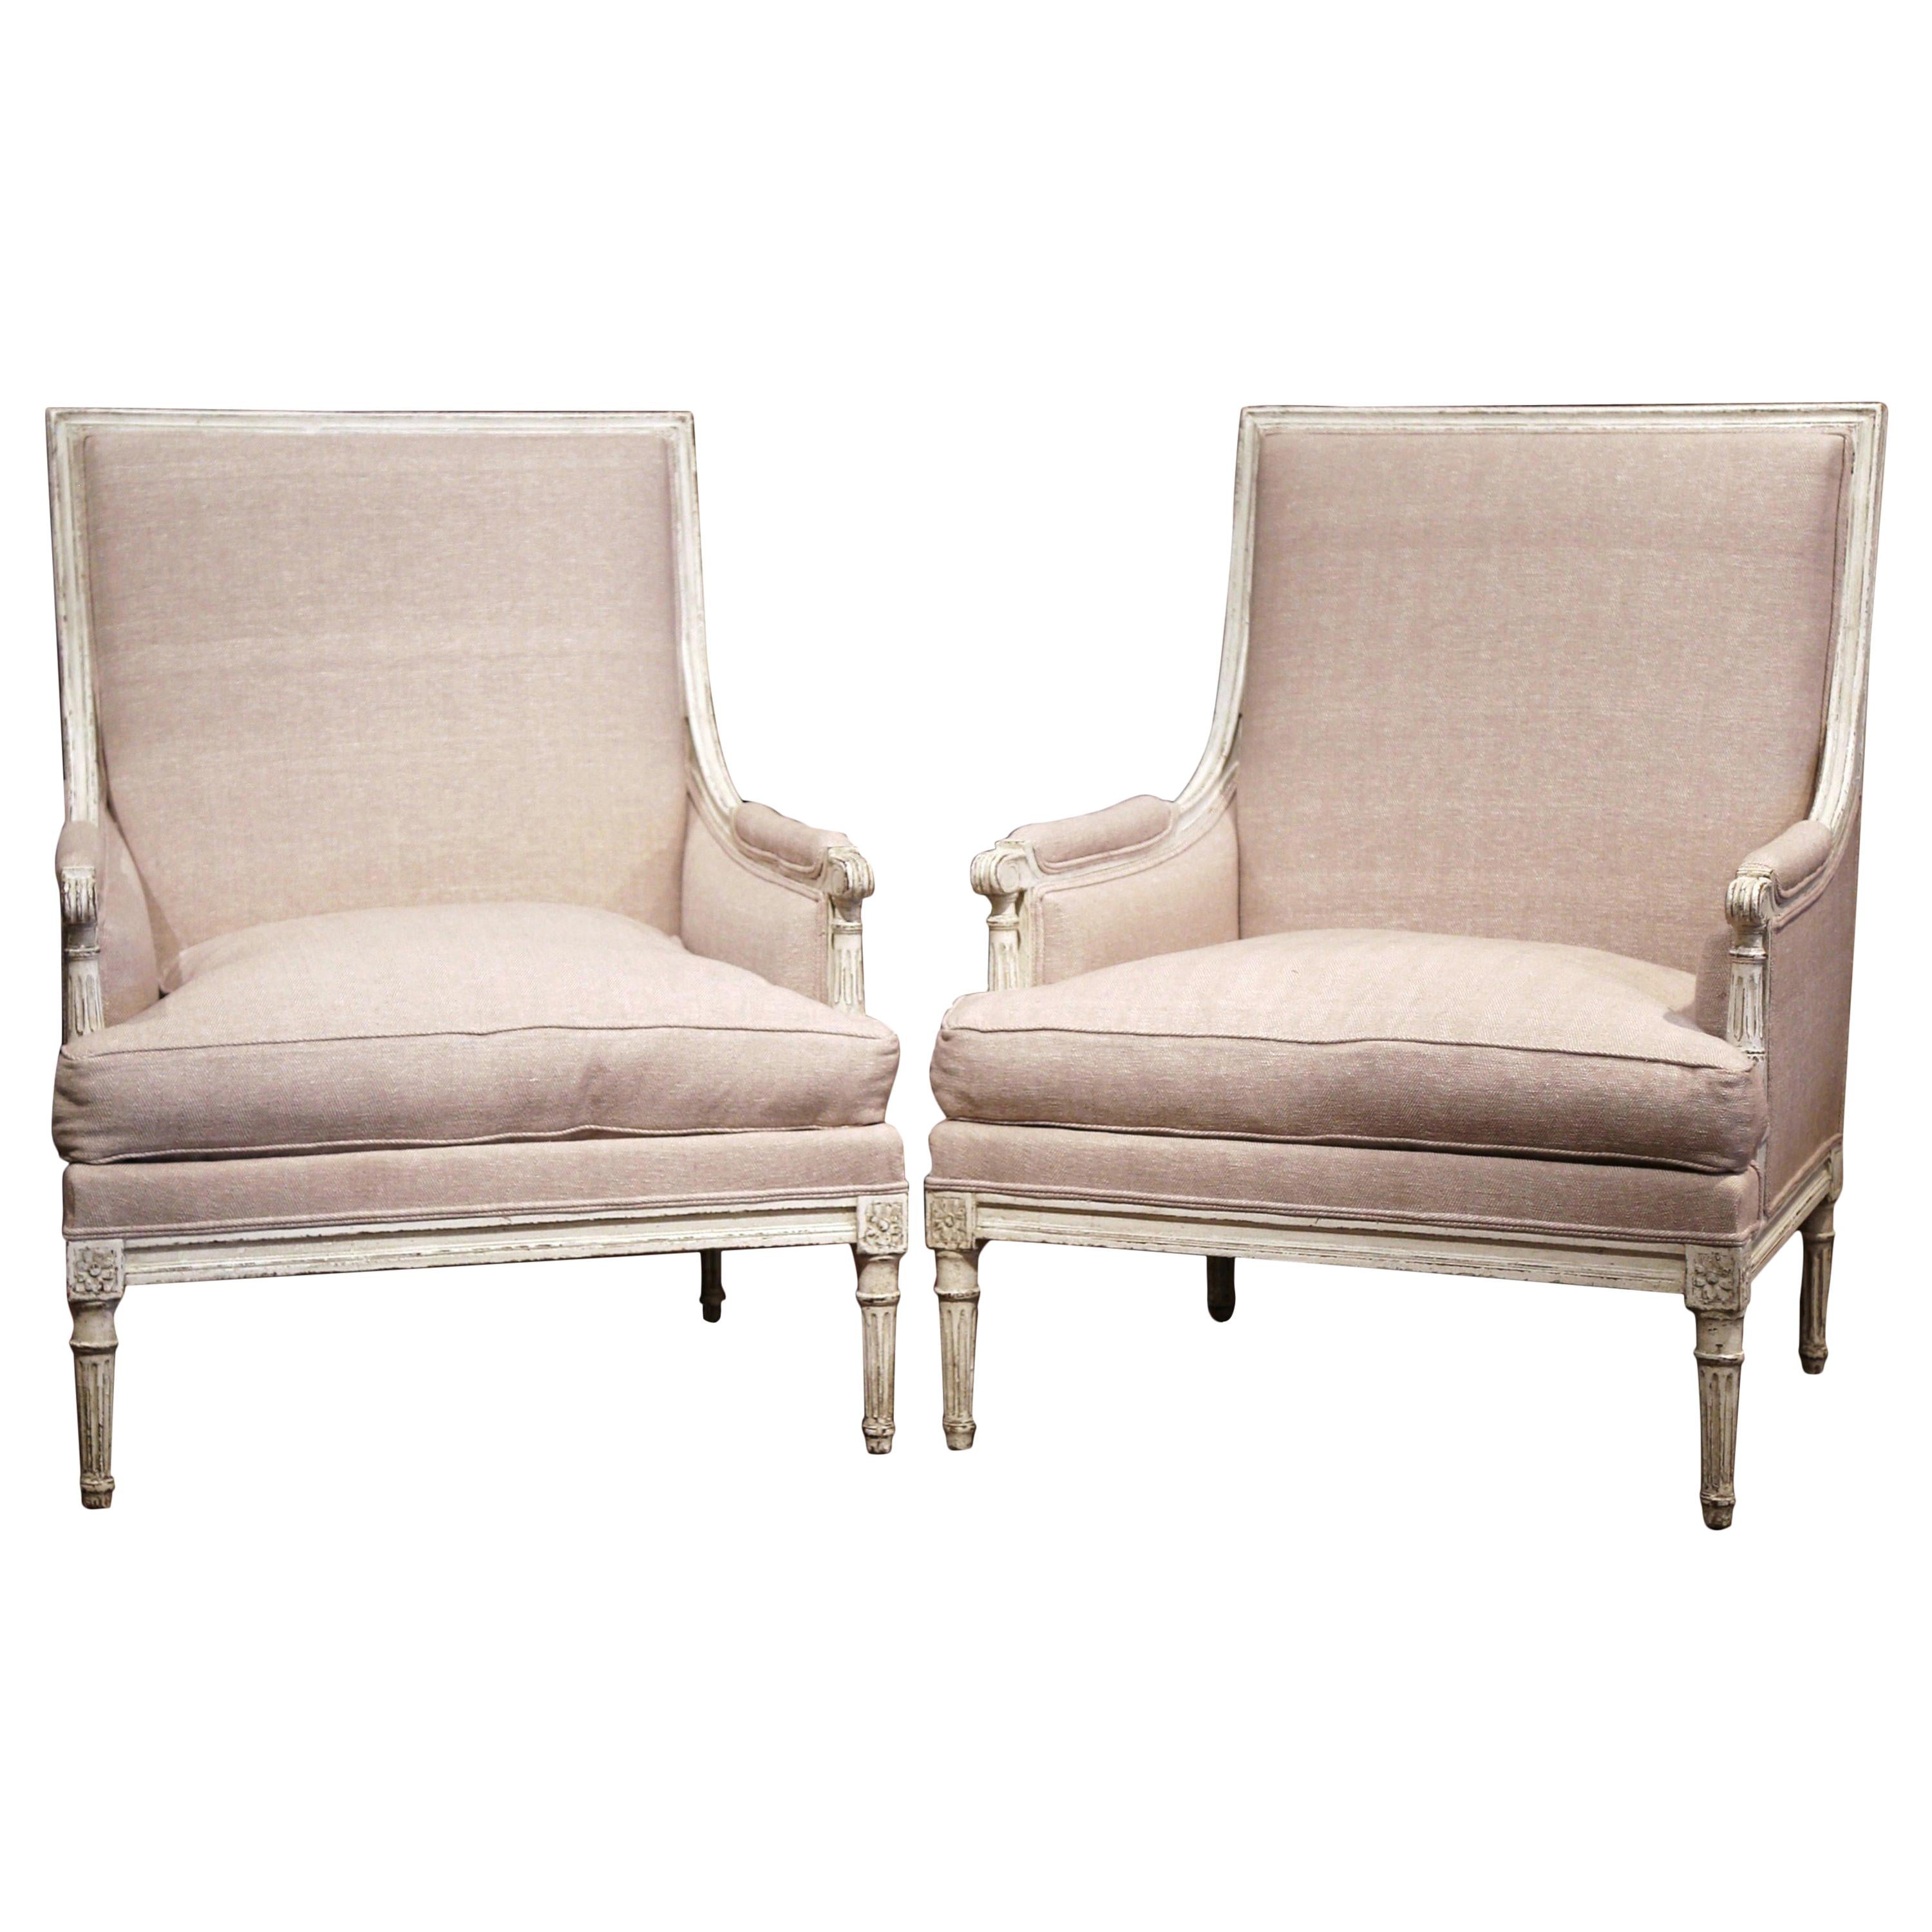 Pair of 19th Century French Louis XVI Carved Painted Armchairs with Beige Fabric